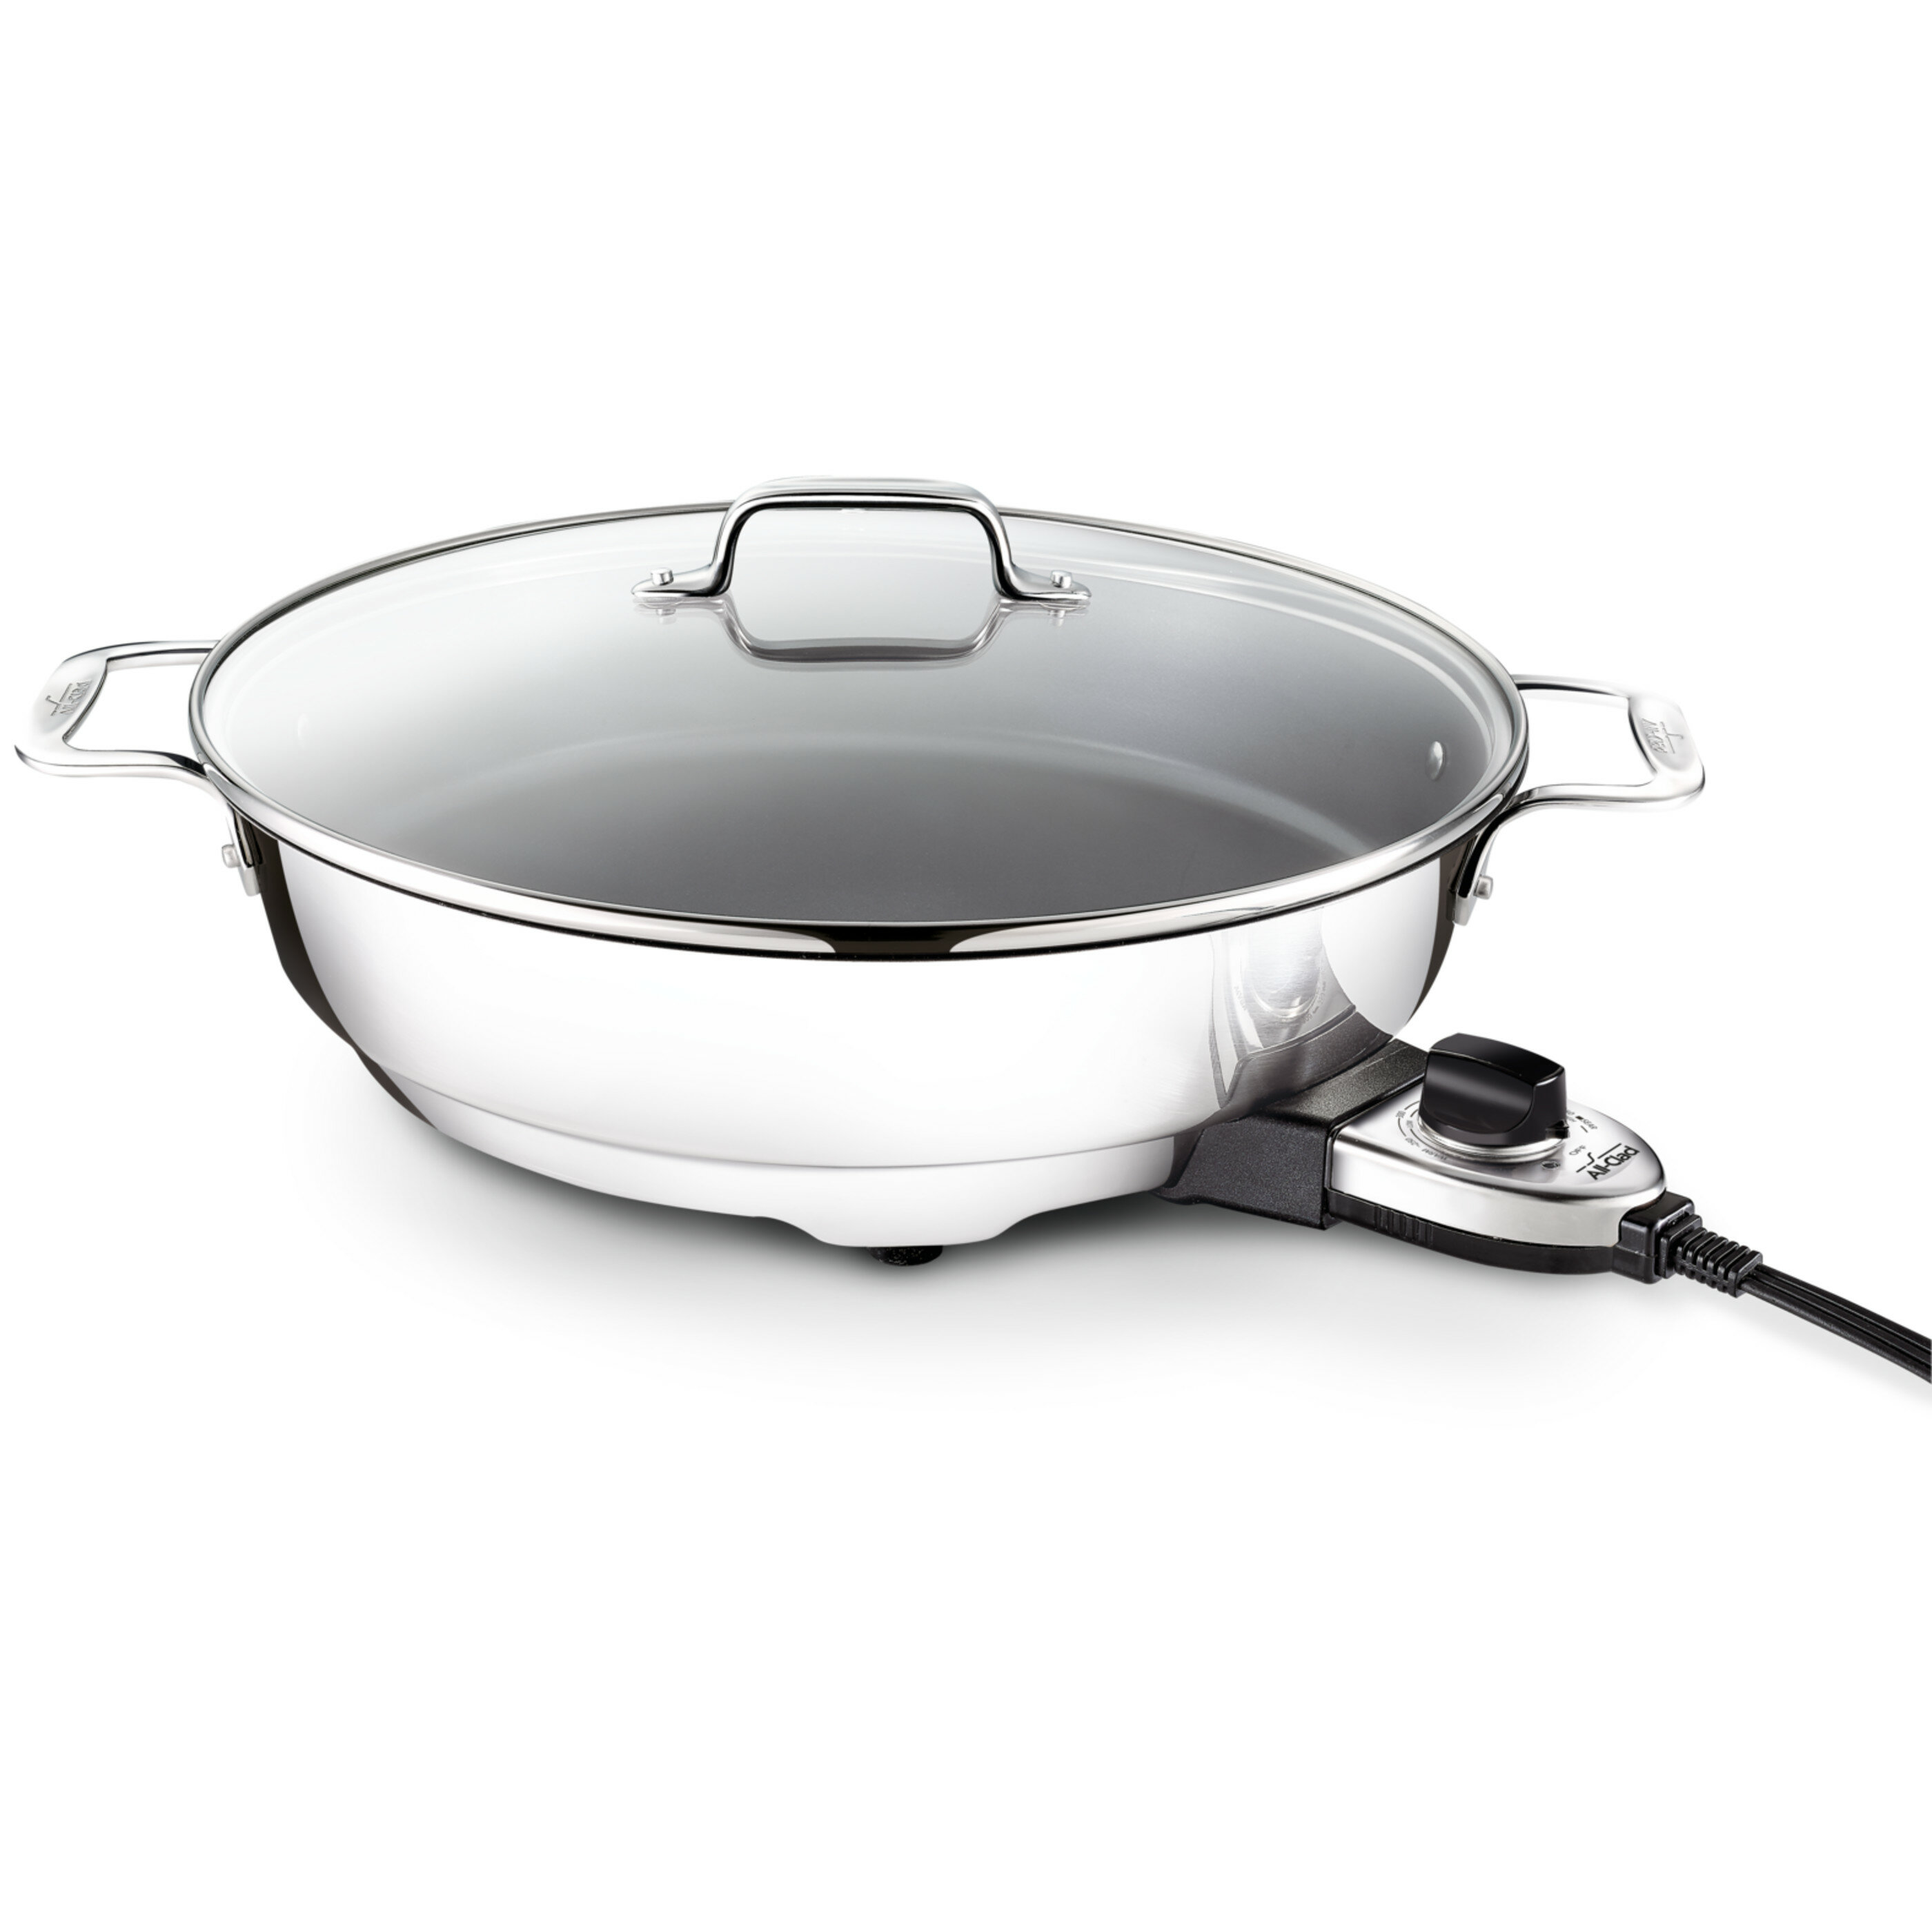 All-Clad Electrics 14 Non-Stick Skillet with Lid & Reviews